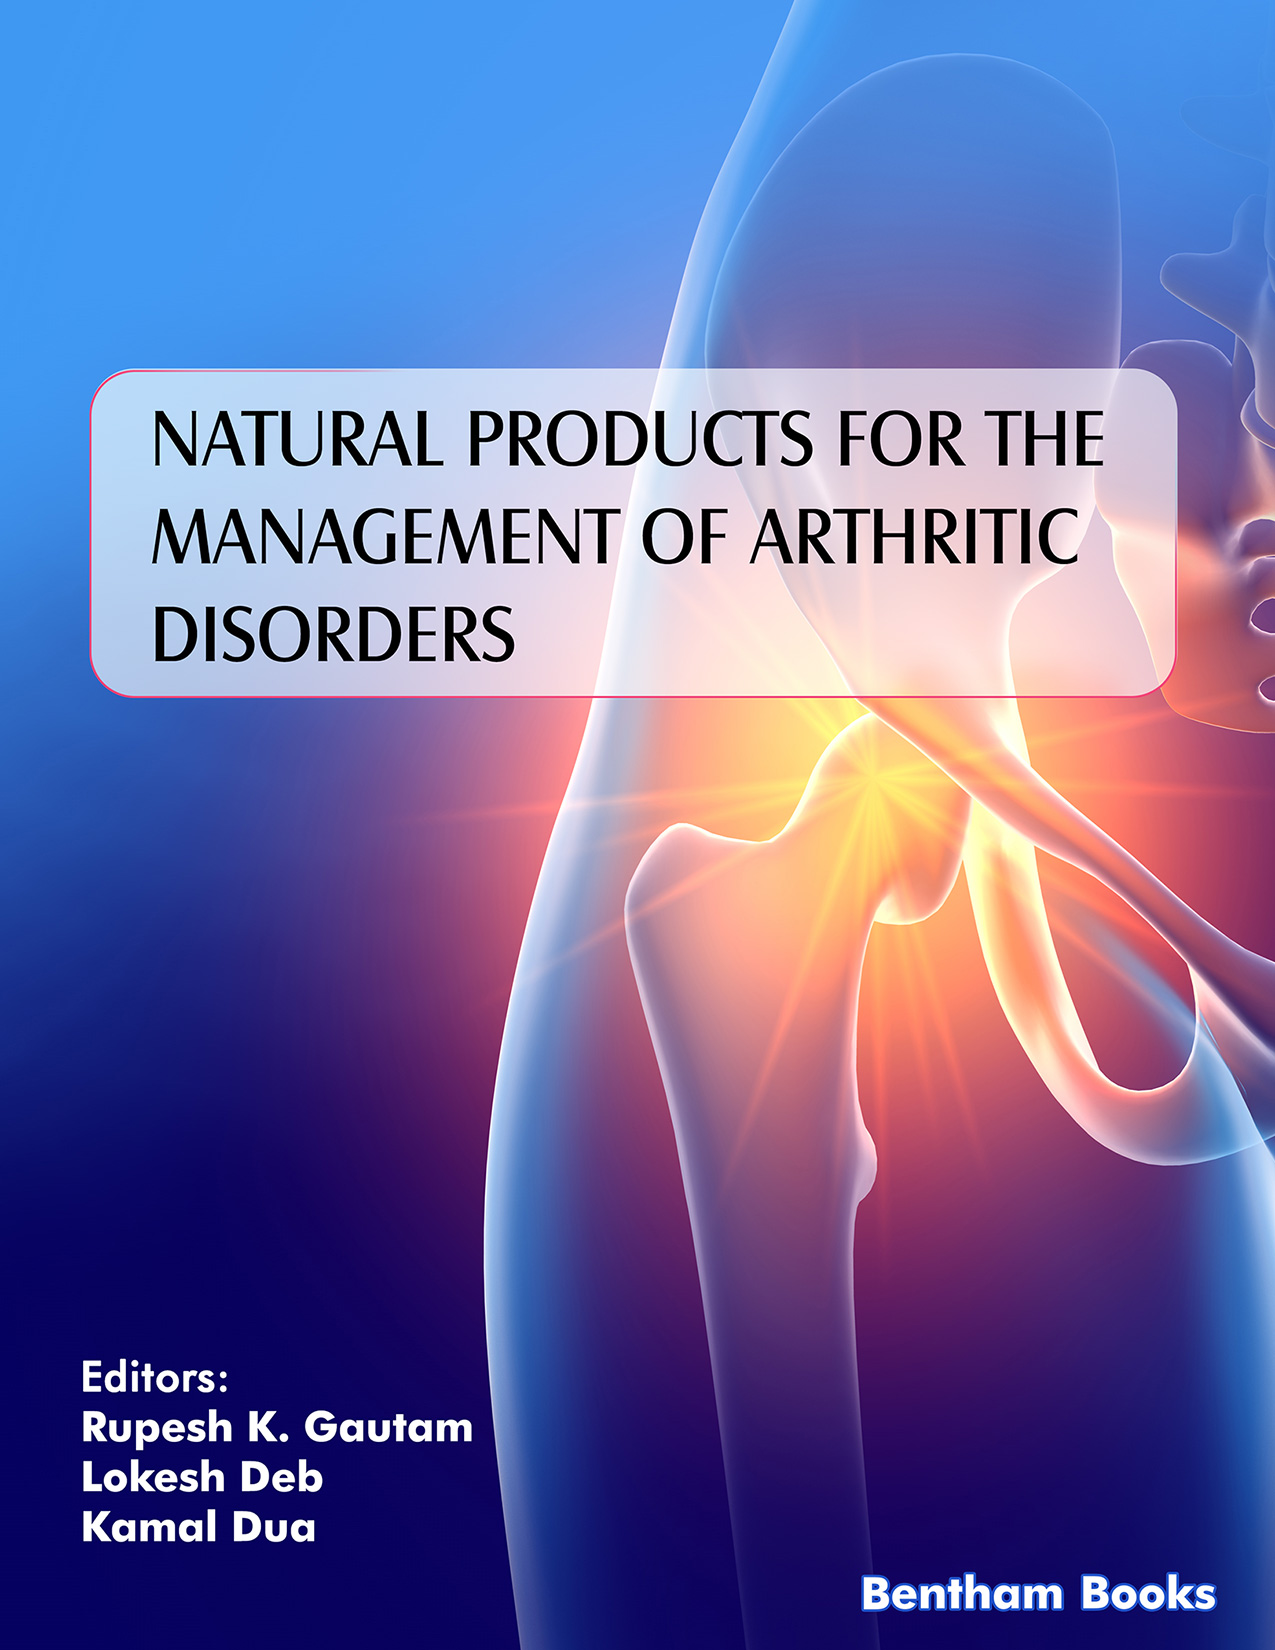 Natural Products for the Management of Arthritic Disorders